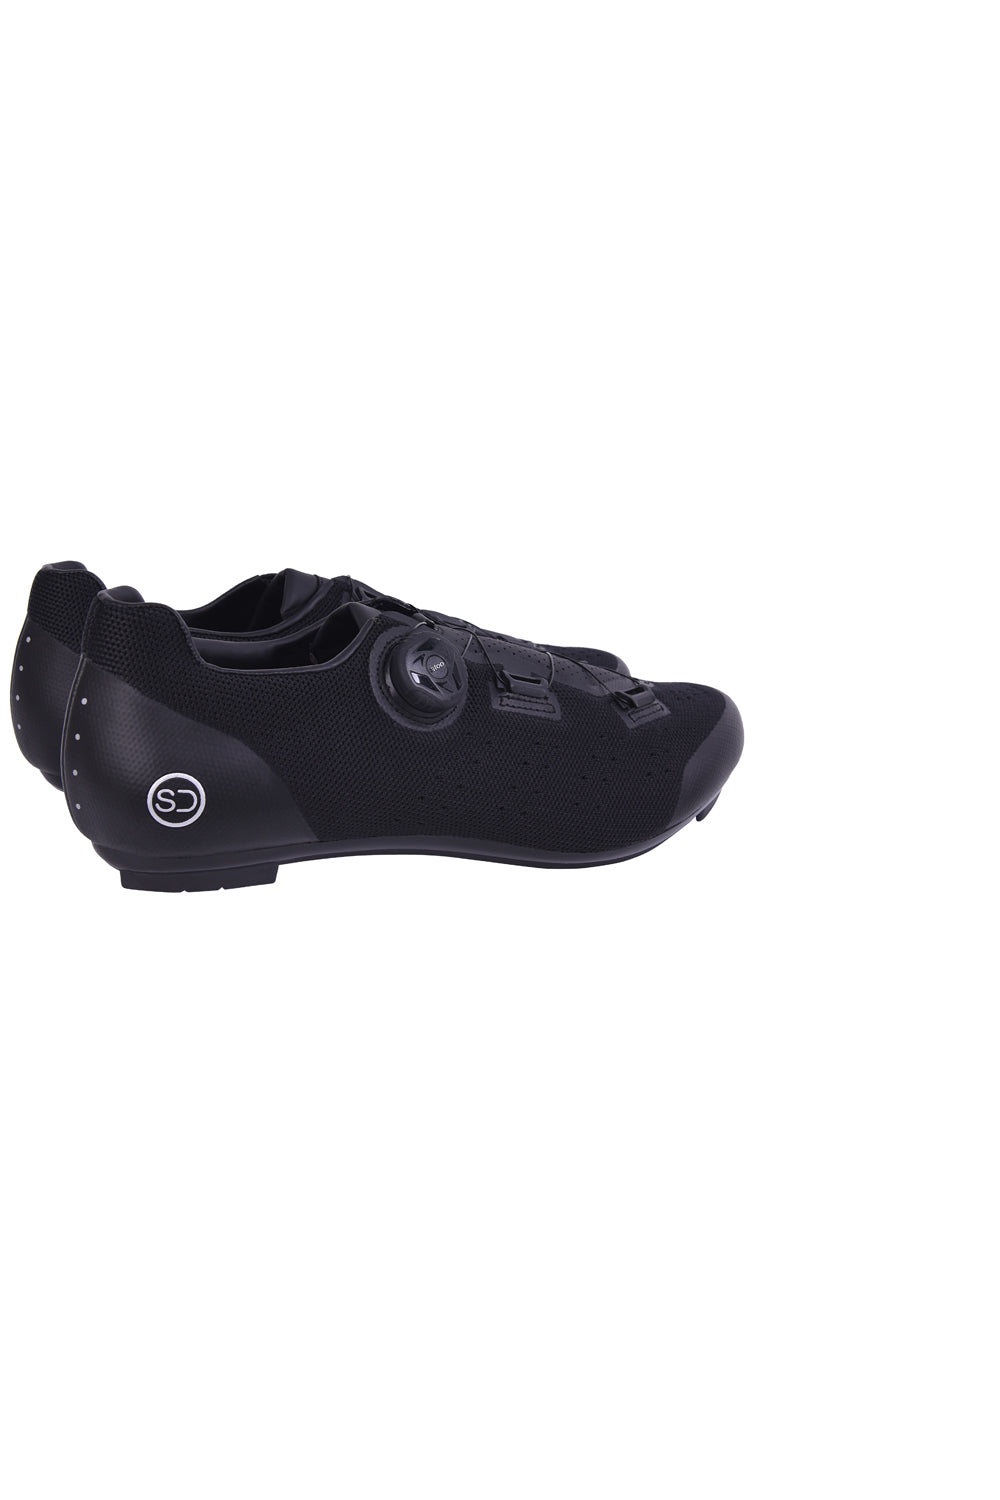 Sundried S-GT2 Knit Road Cycle Shoes Cycle Shoes Activewear